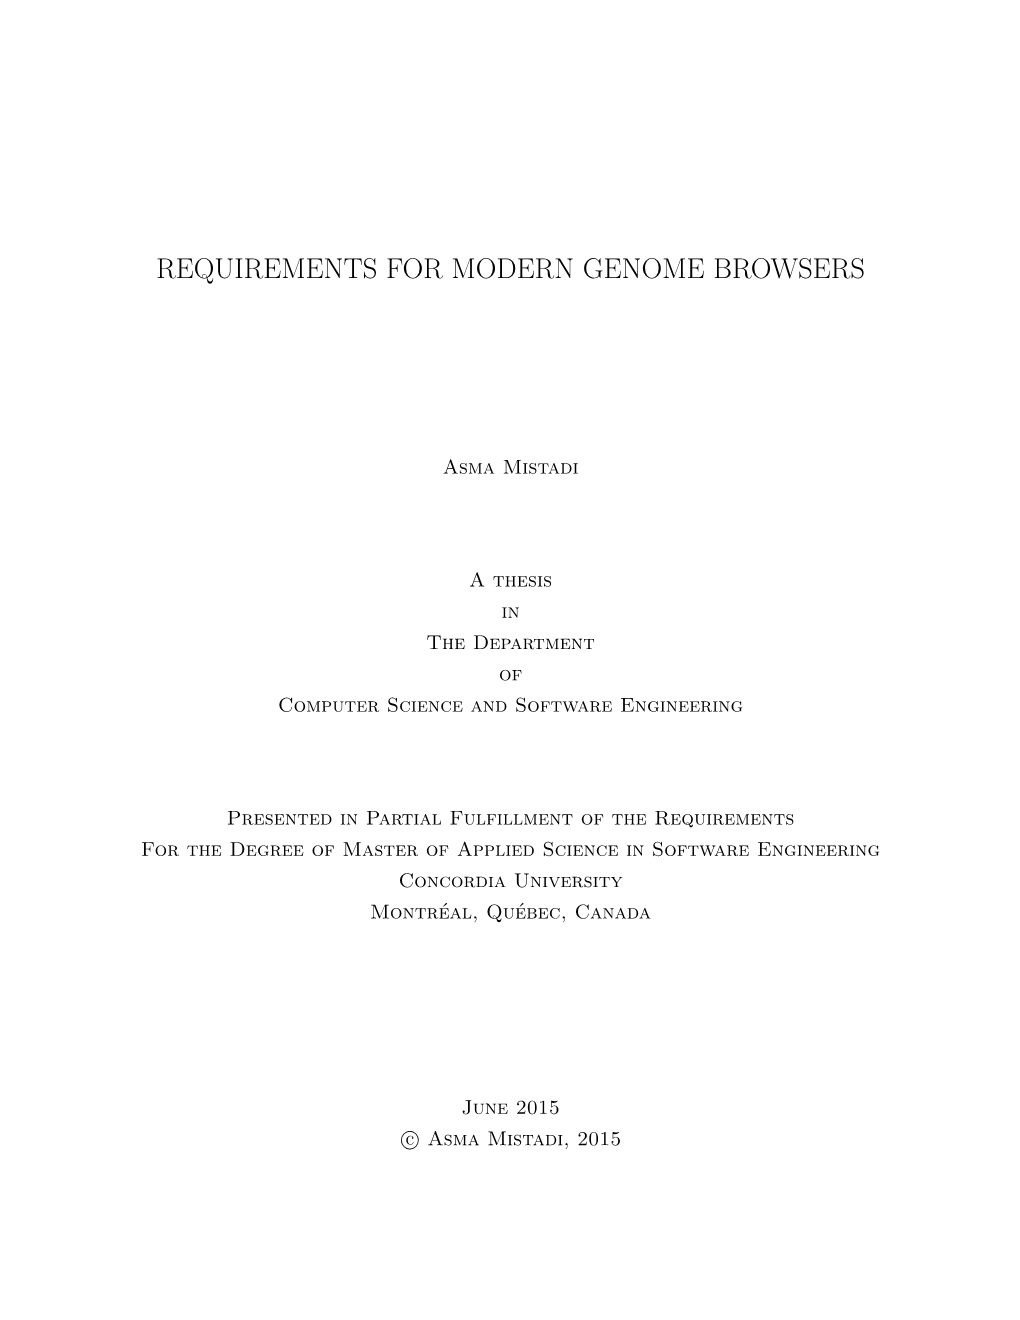 Requirements for Modern Genome Browsers